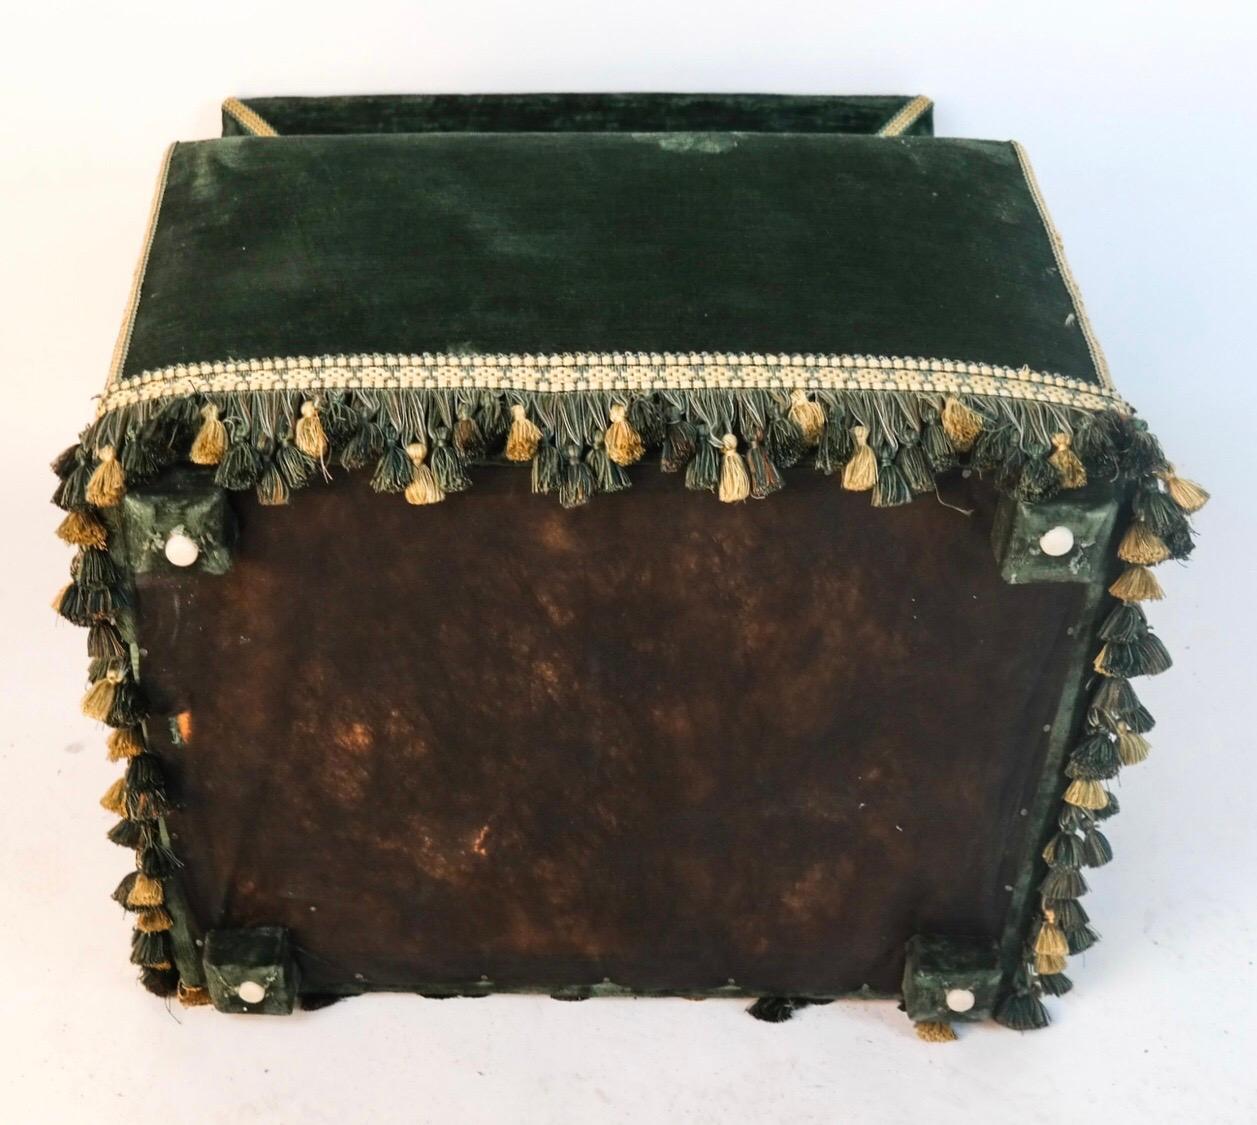 Dog house upholstered with green velvet and green and cream fringe. Hinged top revealing green pillow within.